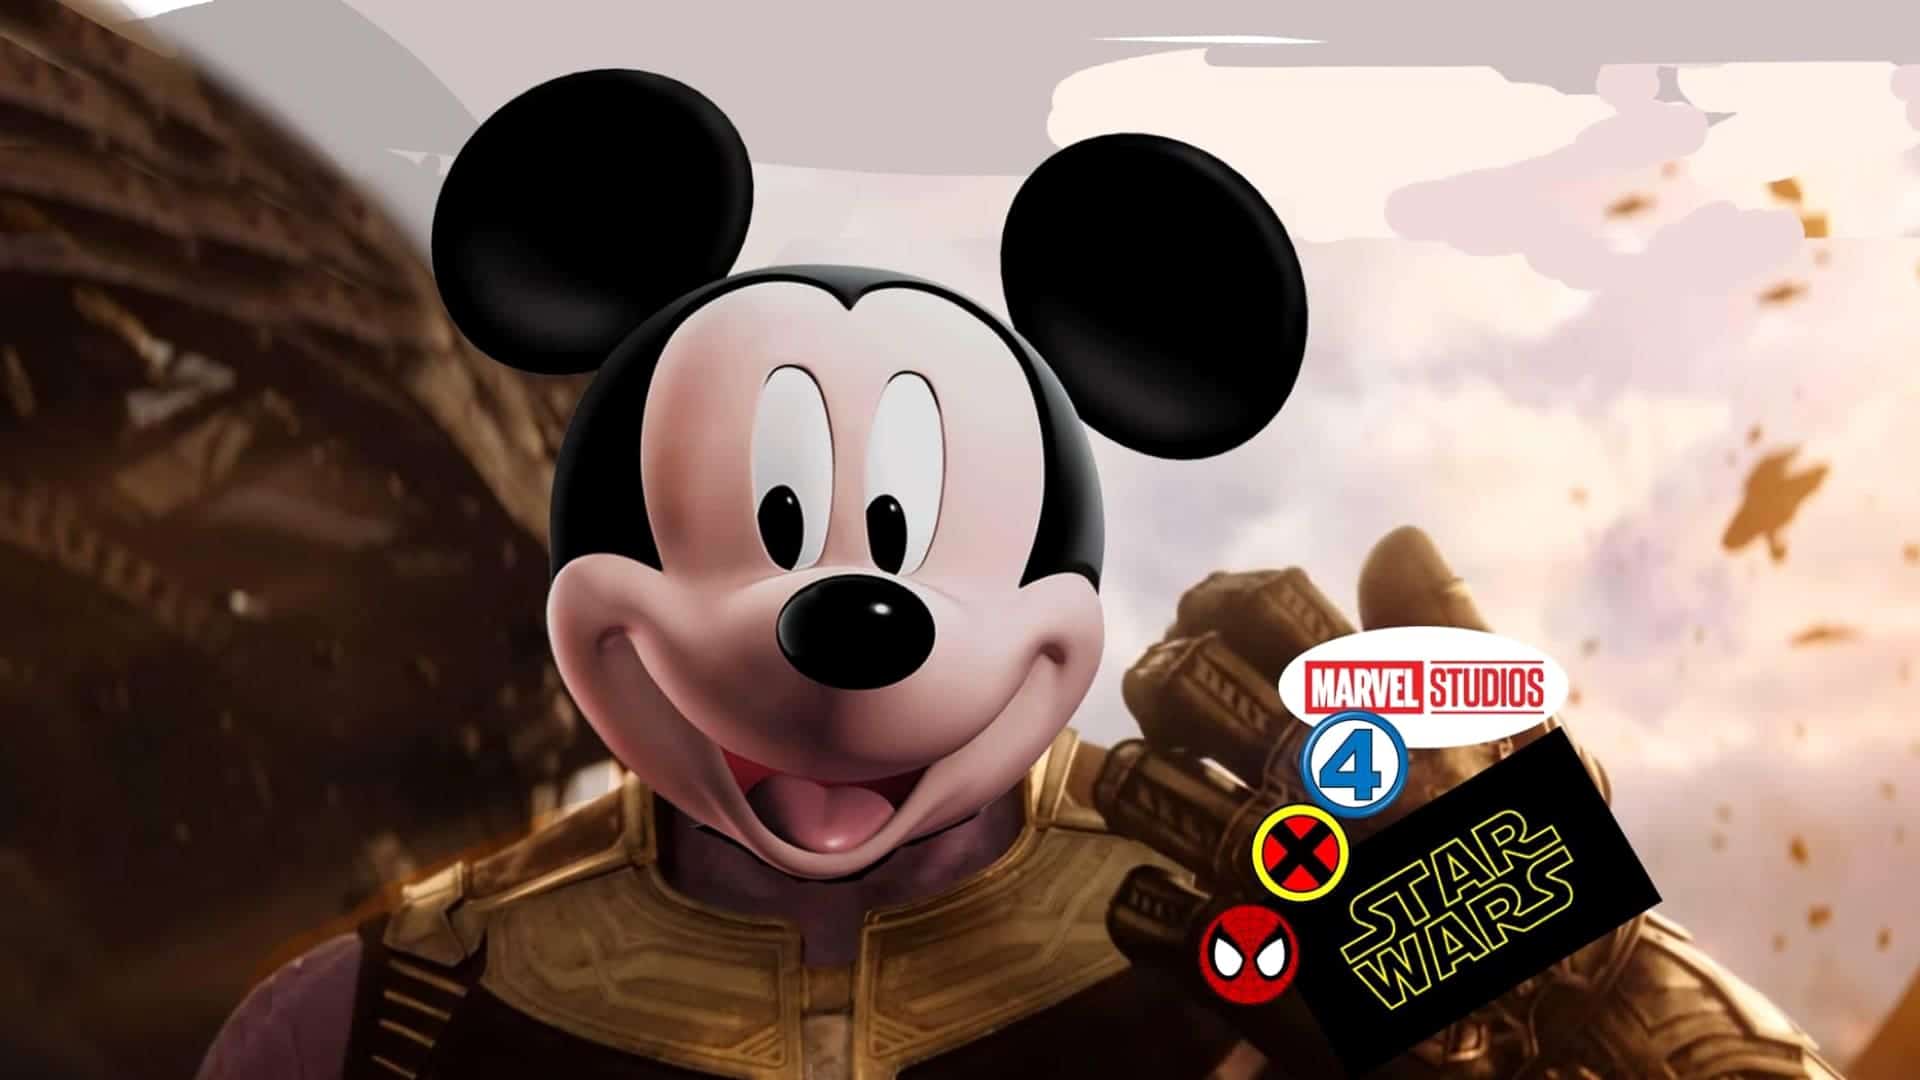 What Does Disney Own - Companies Disney Owns - Companies Owned By Disney - Featured - StudioBinder